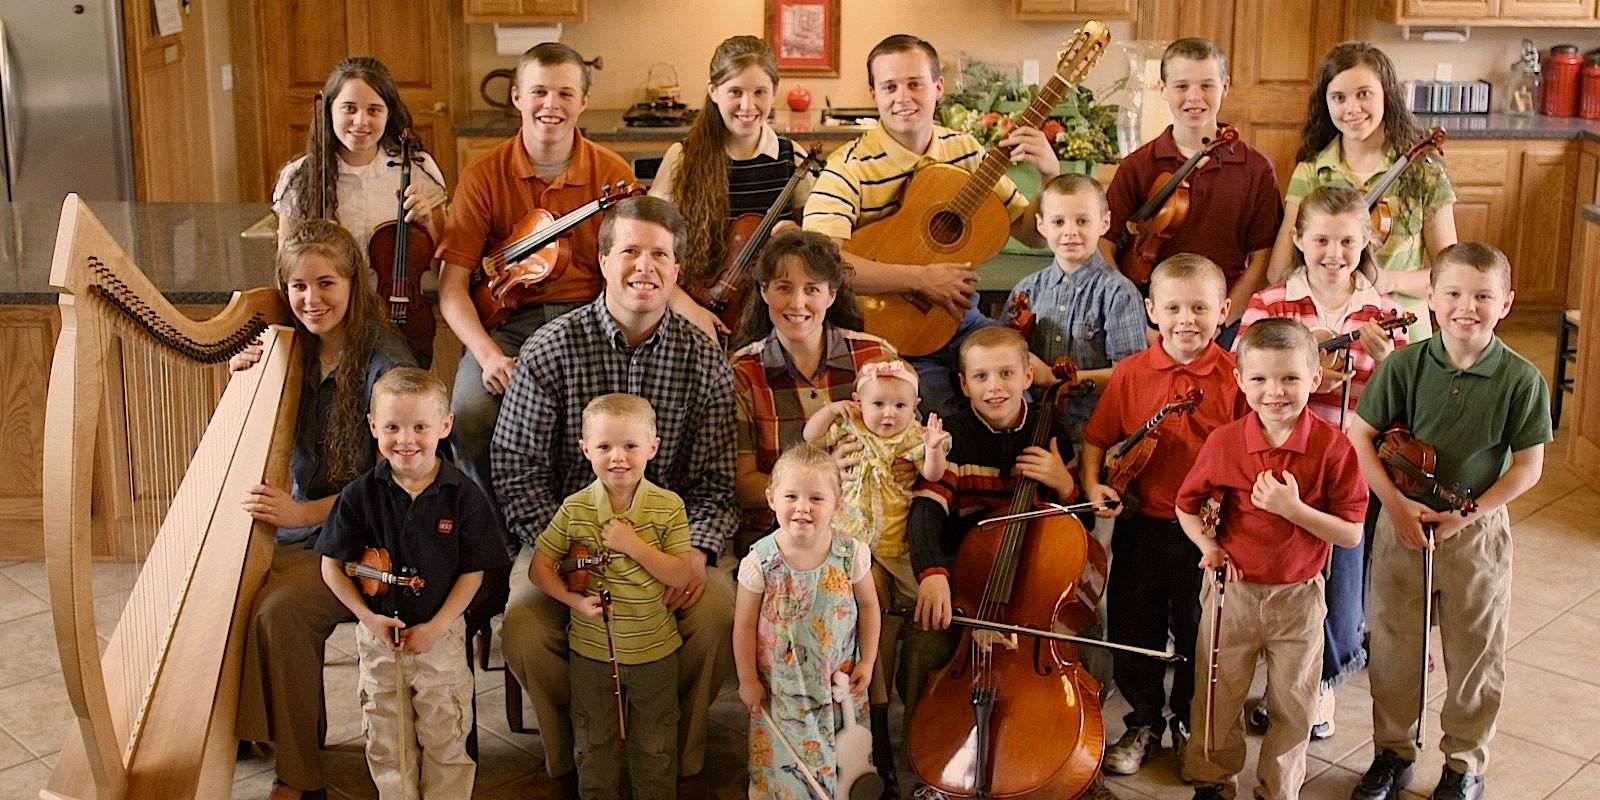 19 Kids and Counting's Duggar Family standing next to each other in their kitchen holding their instruments and smiling at the camera